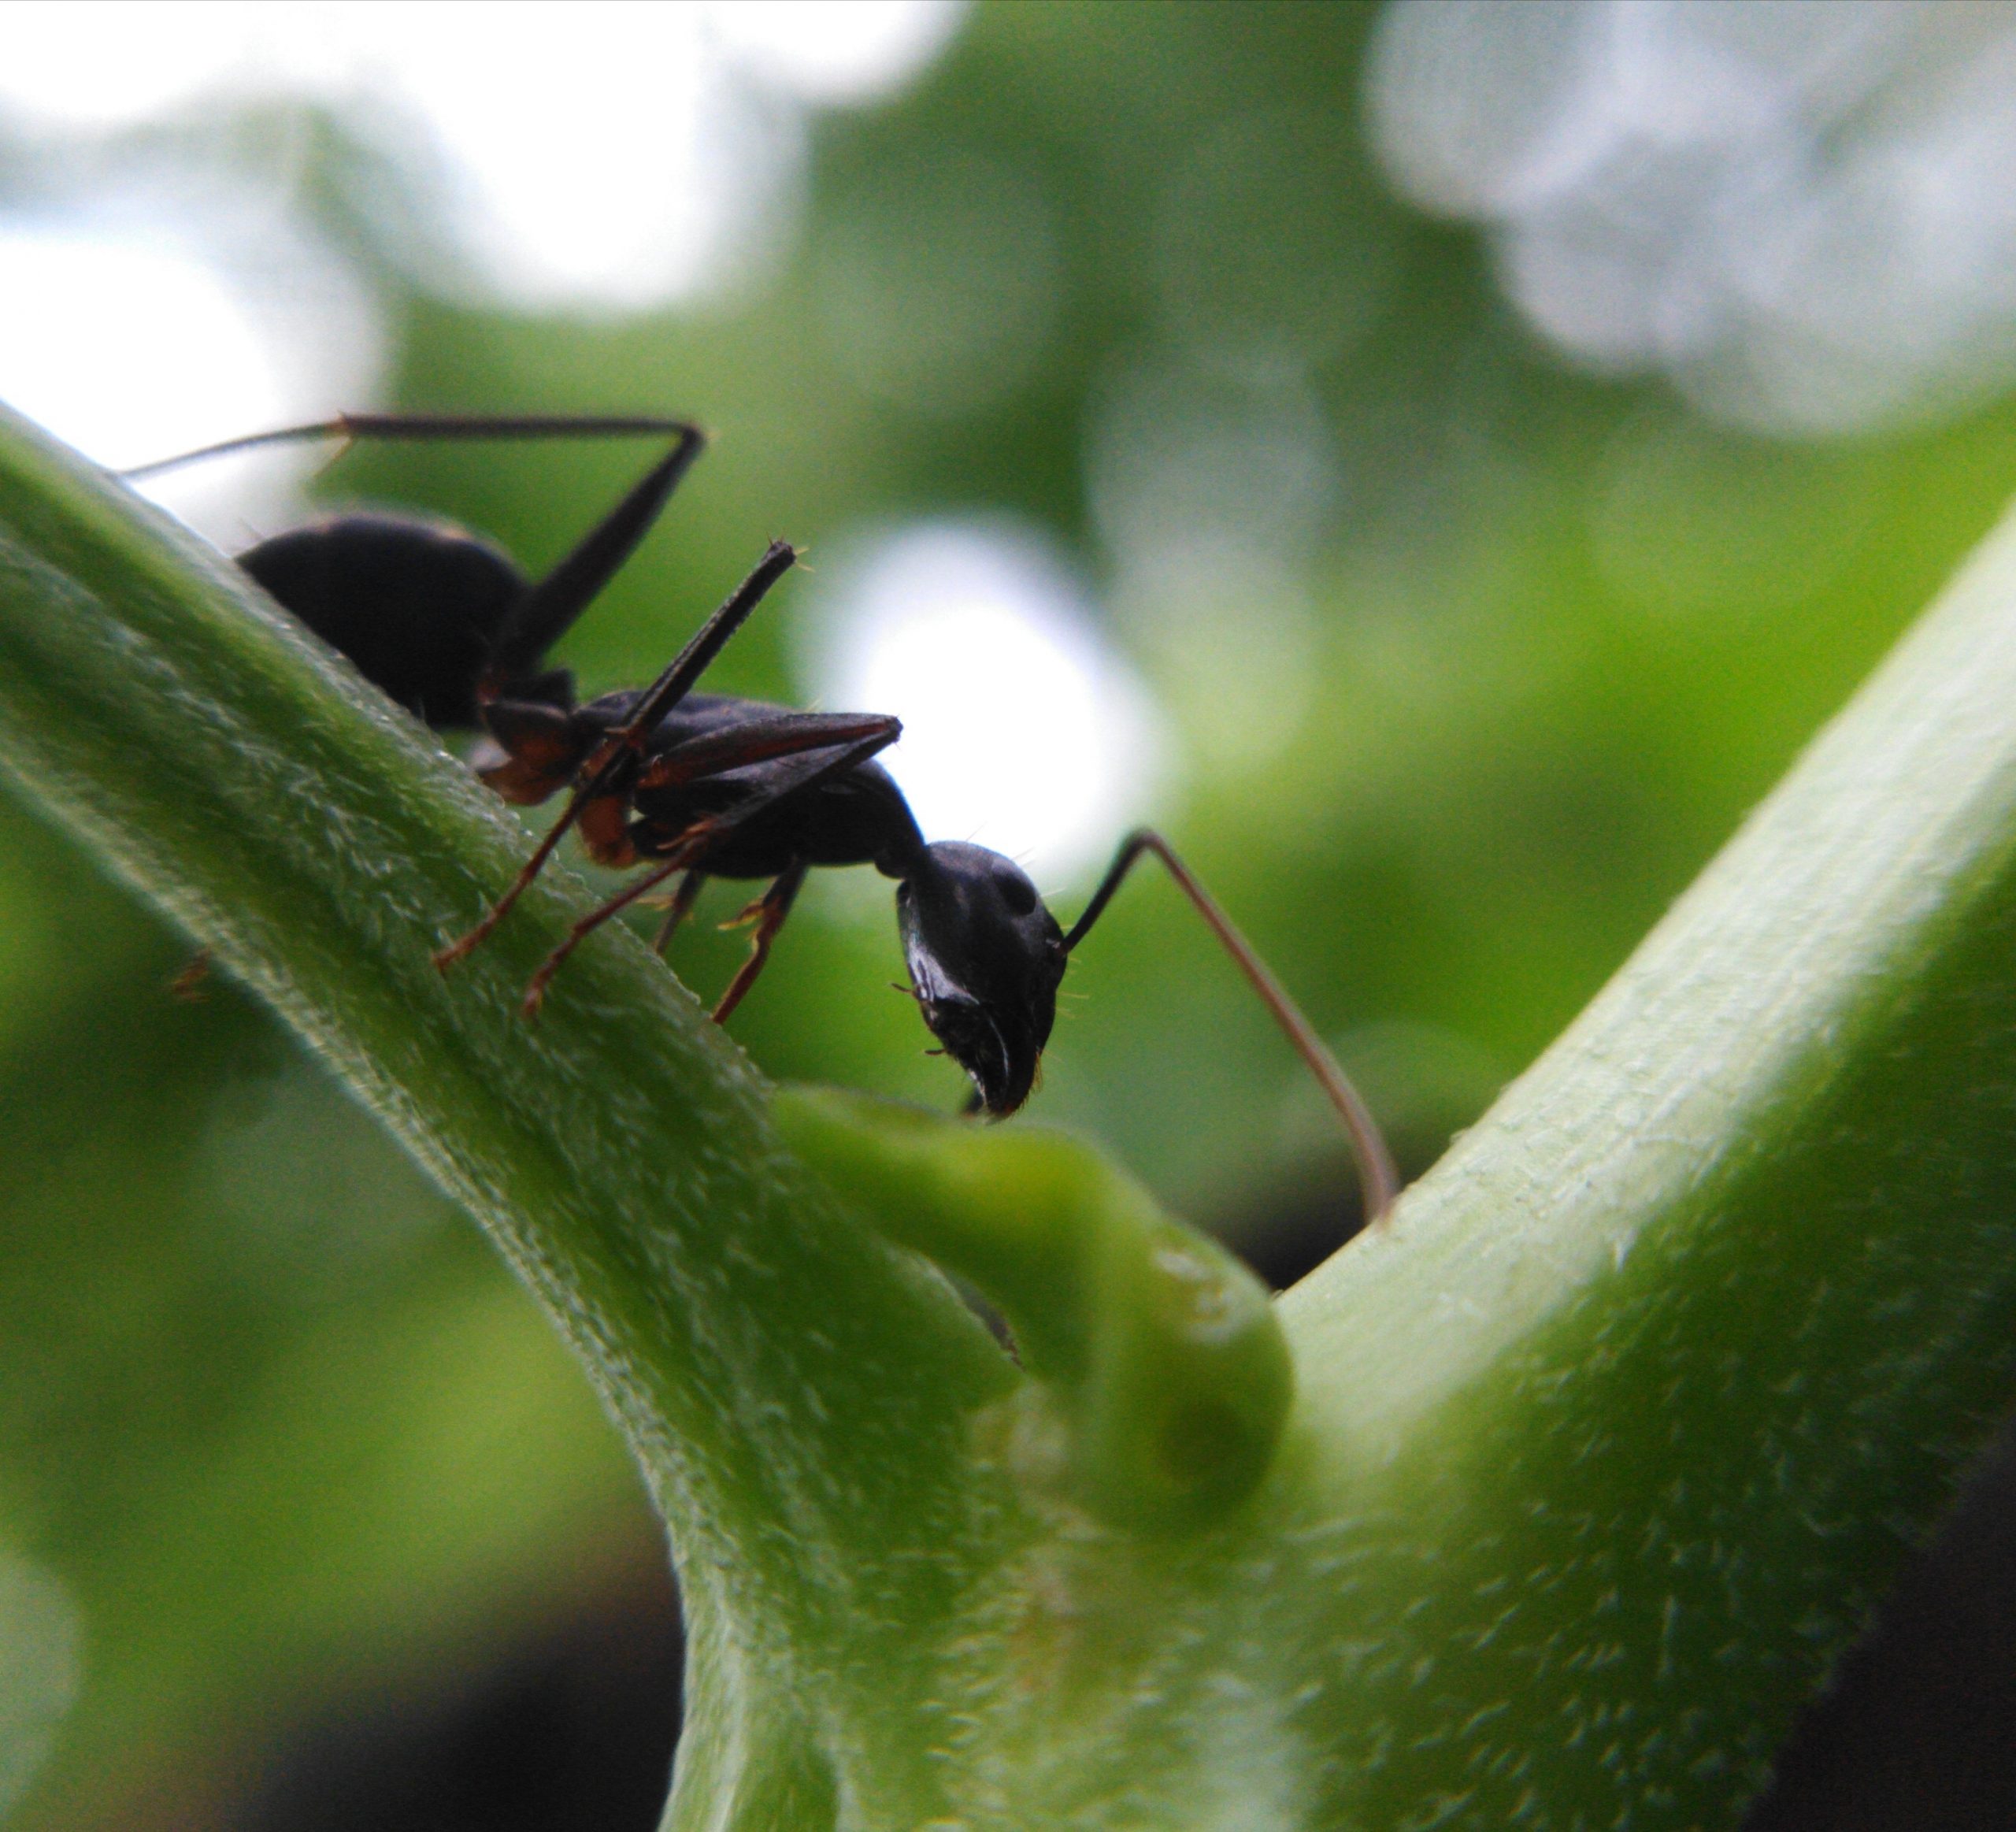 ant on a plant stem